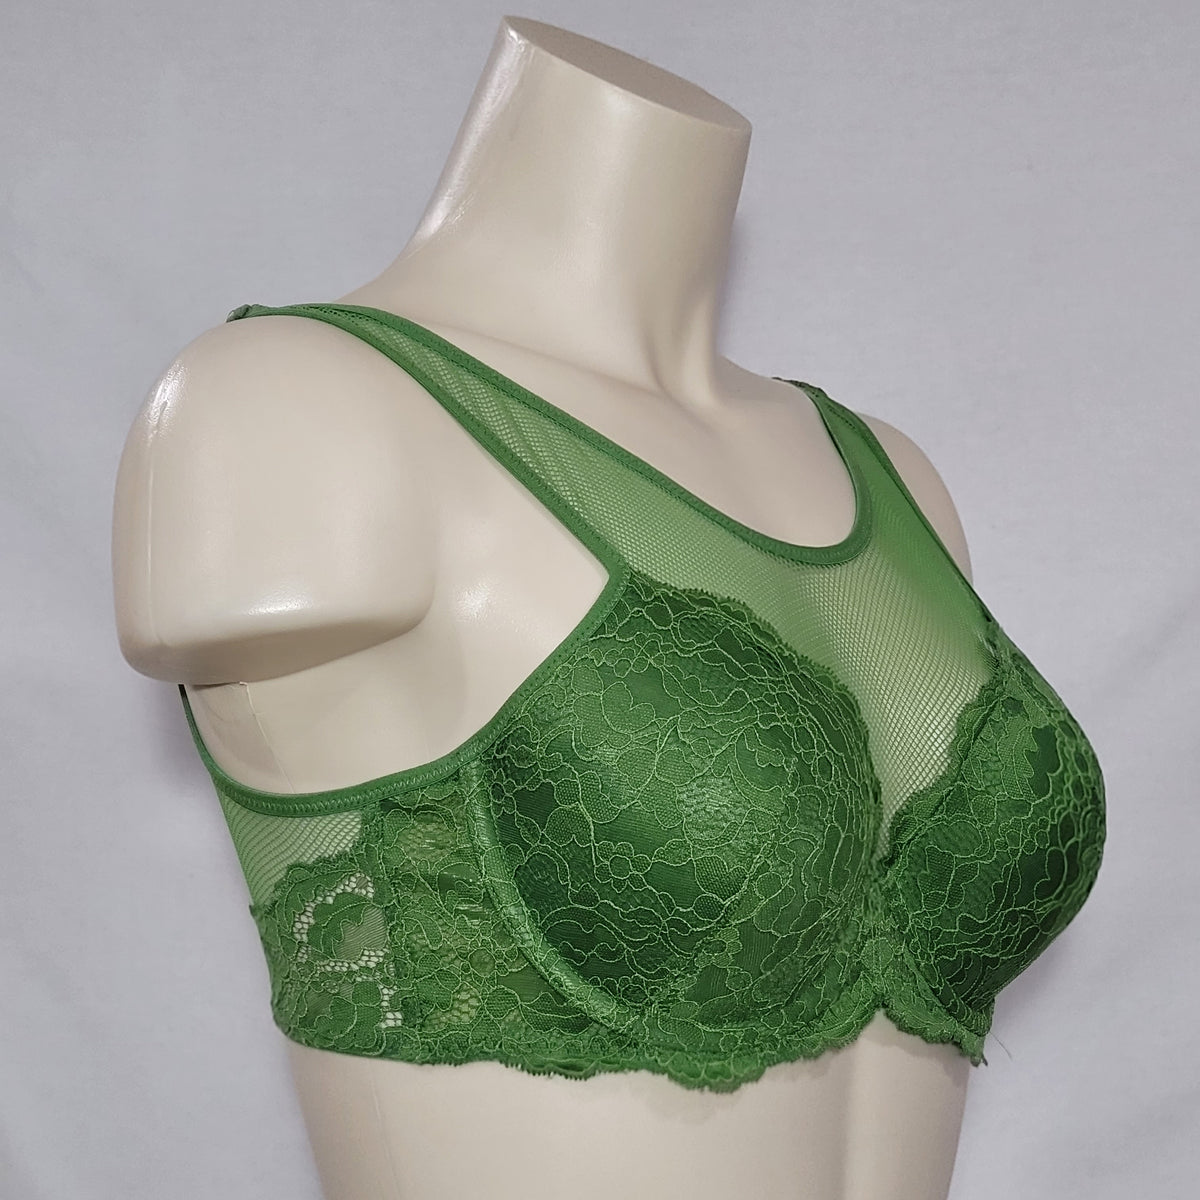 Gilligan & O'Malley Everyday Lace Lightly Lined Bra 34C